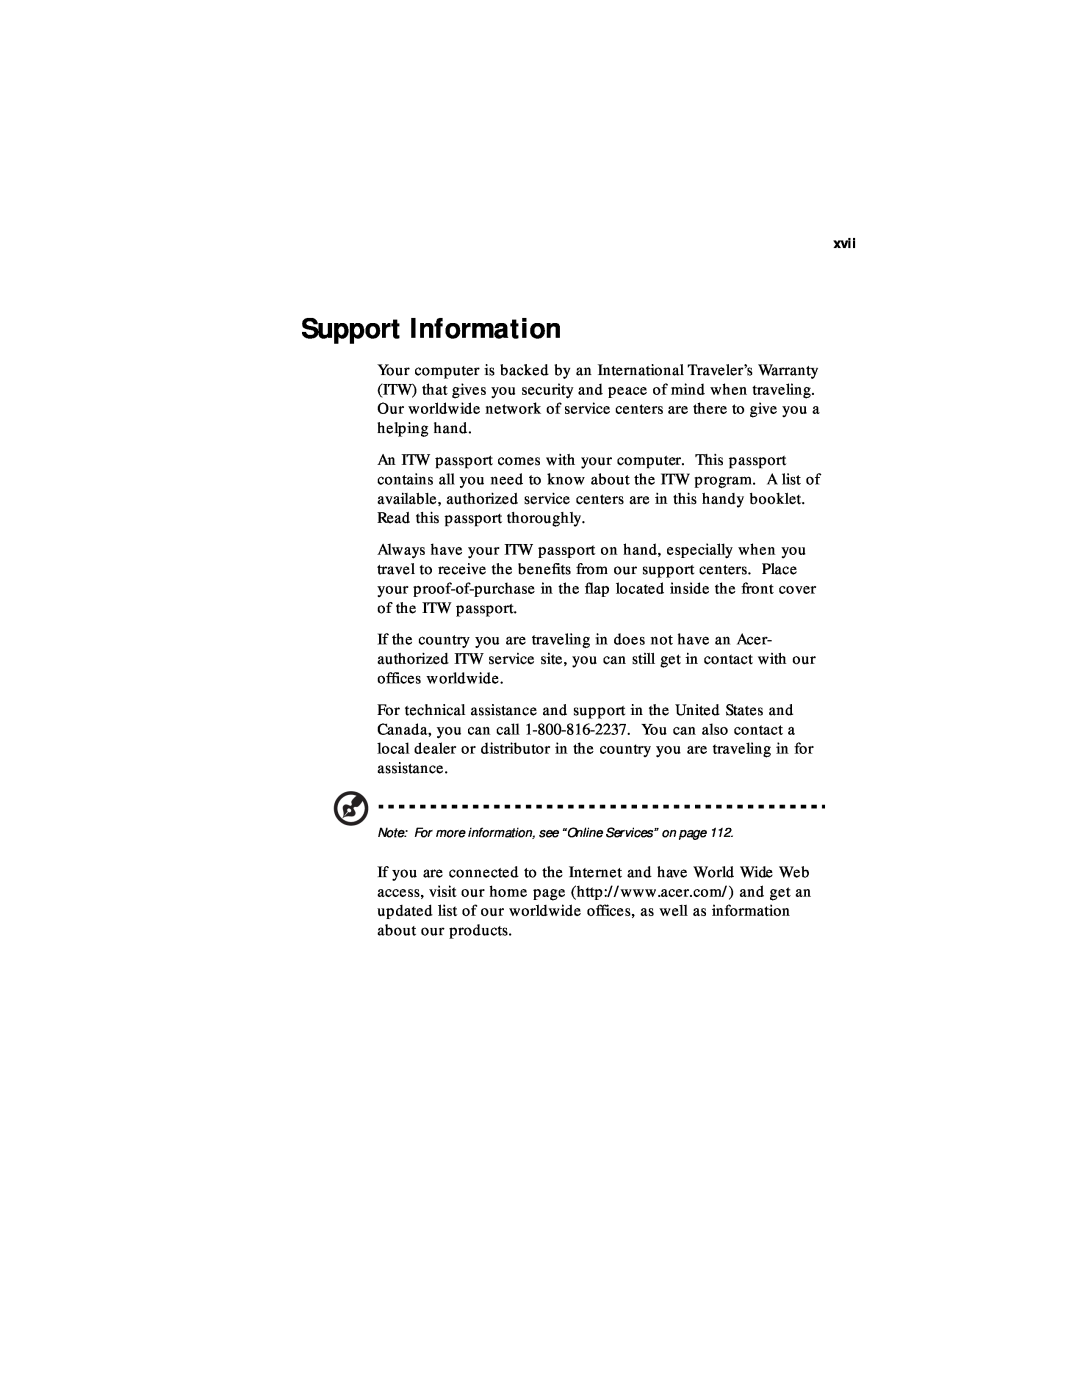 Acer 330 Series manual Support Information, xvii, Note For more information, see “Online Services” on page 